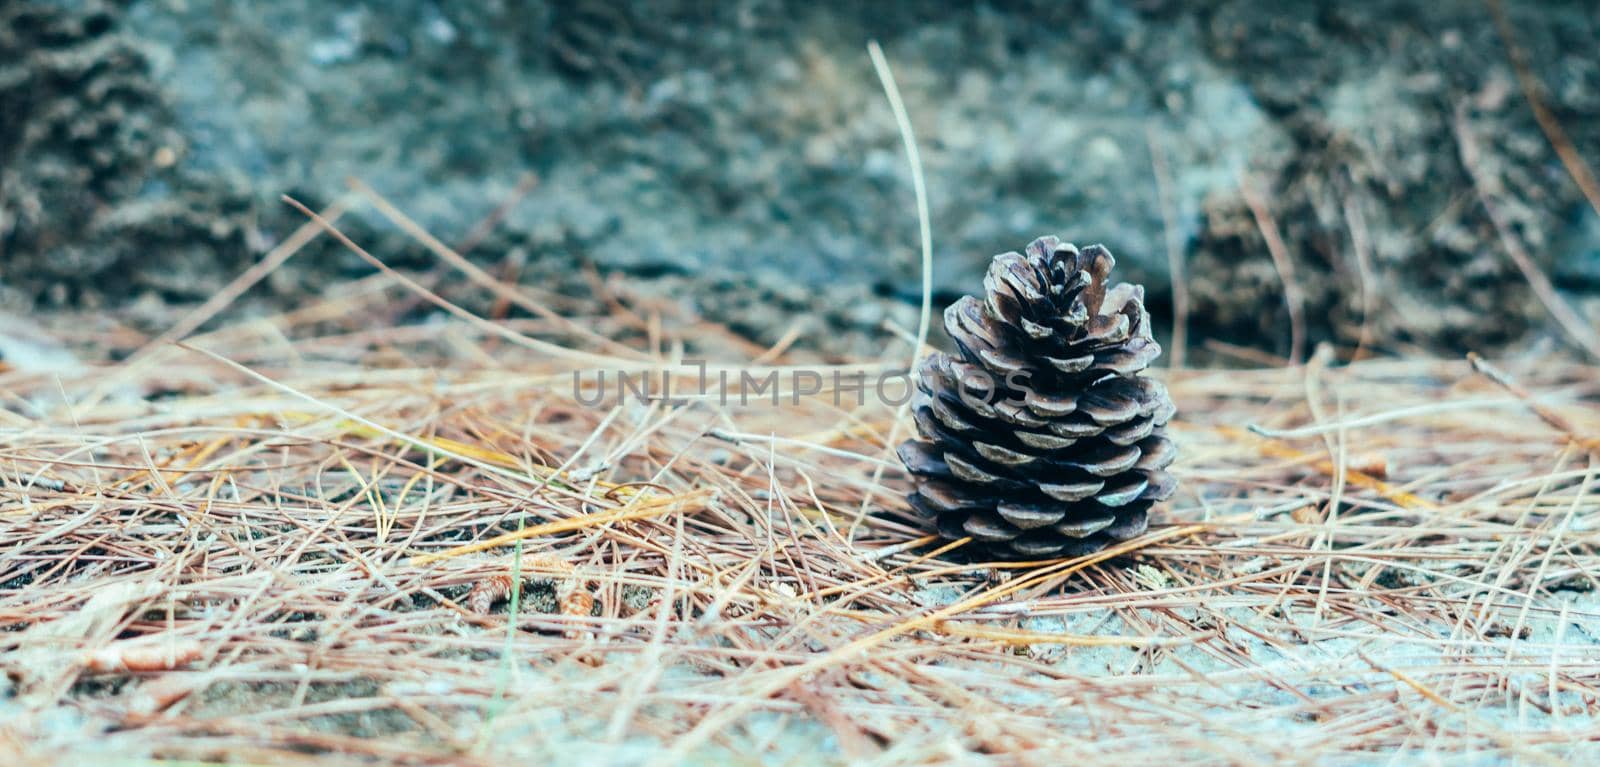 BANNER Abstract background. Real nature photo. Close up one alone coniferous pine cone, forest day, dry needles lie on ground. Pale beige blue brown color sunlit haze. Symbol of life, beginning.